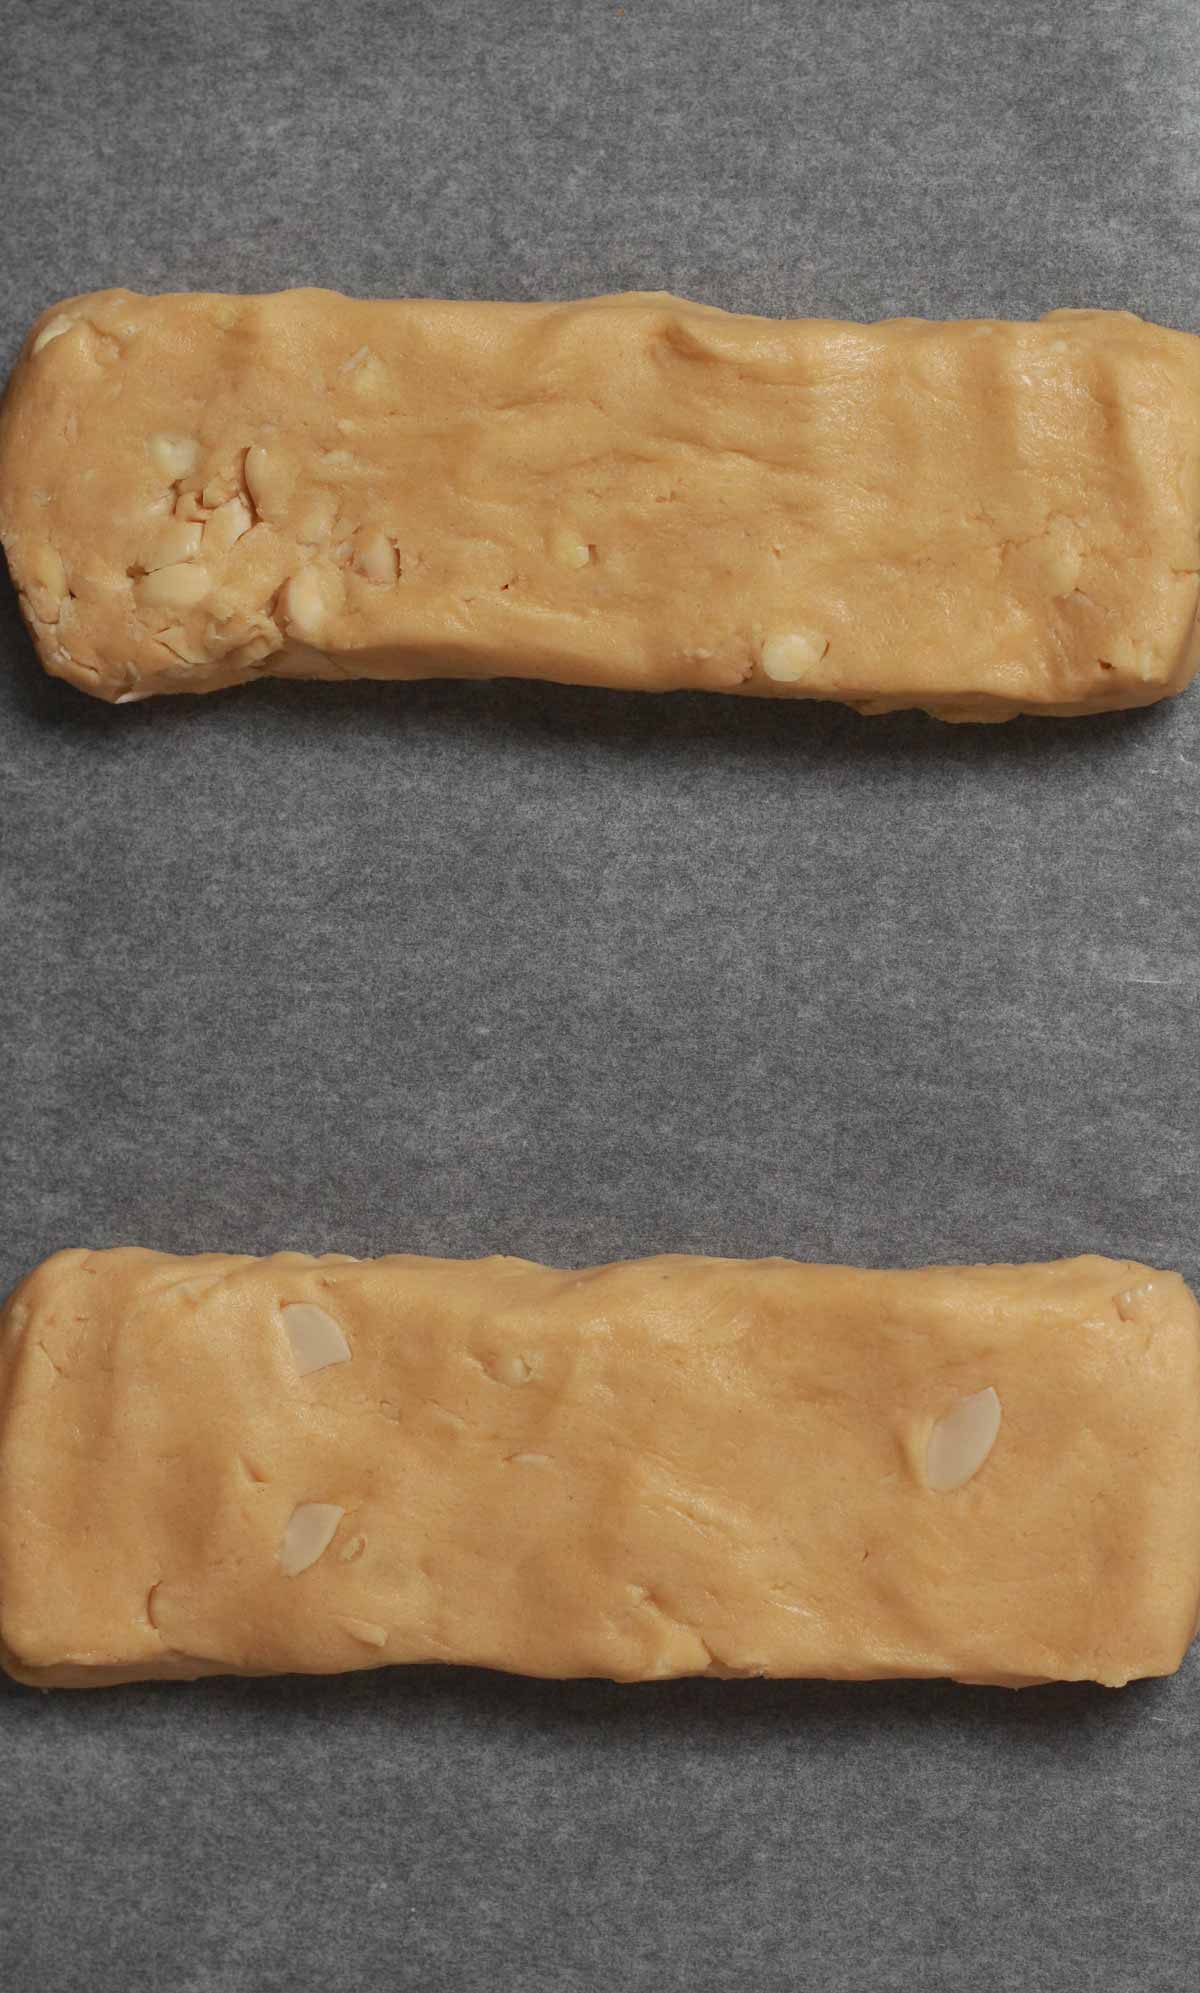 2 Log Shaped Pieces Of Dough On Baking Tray